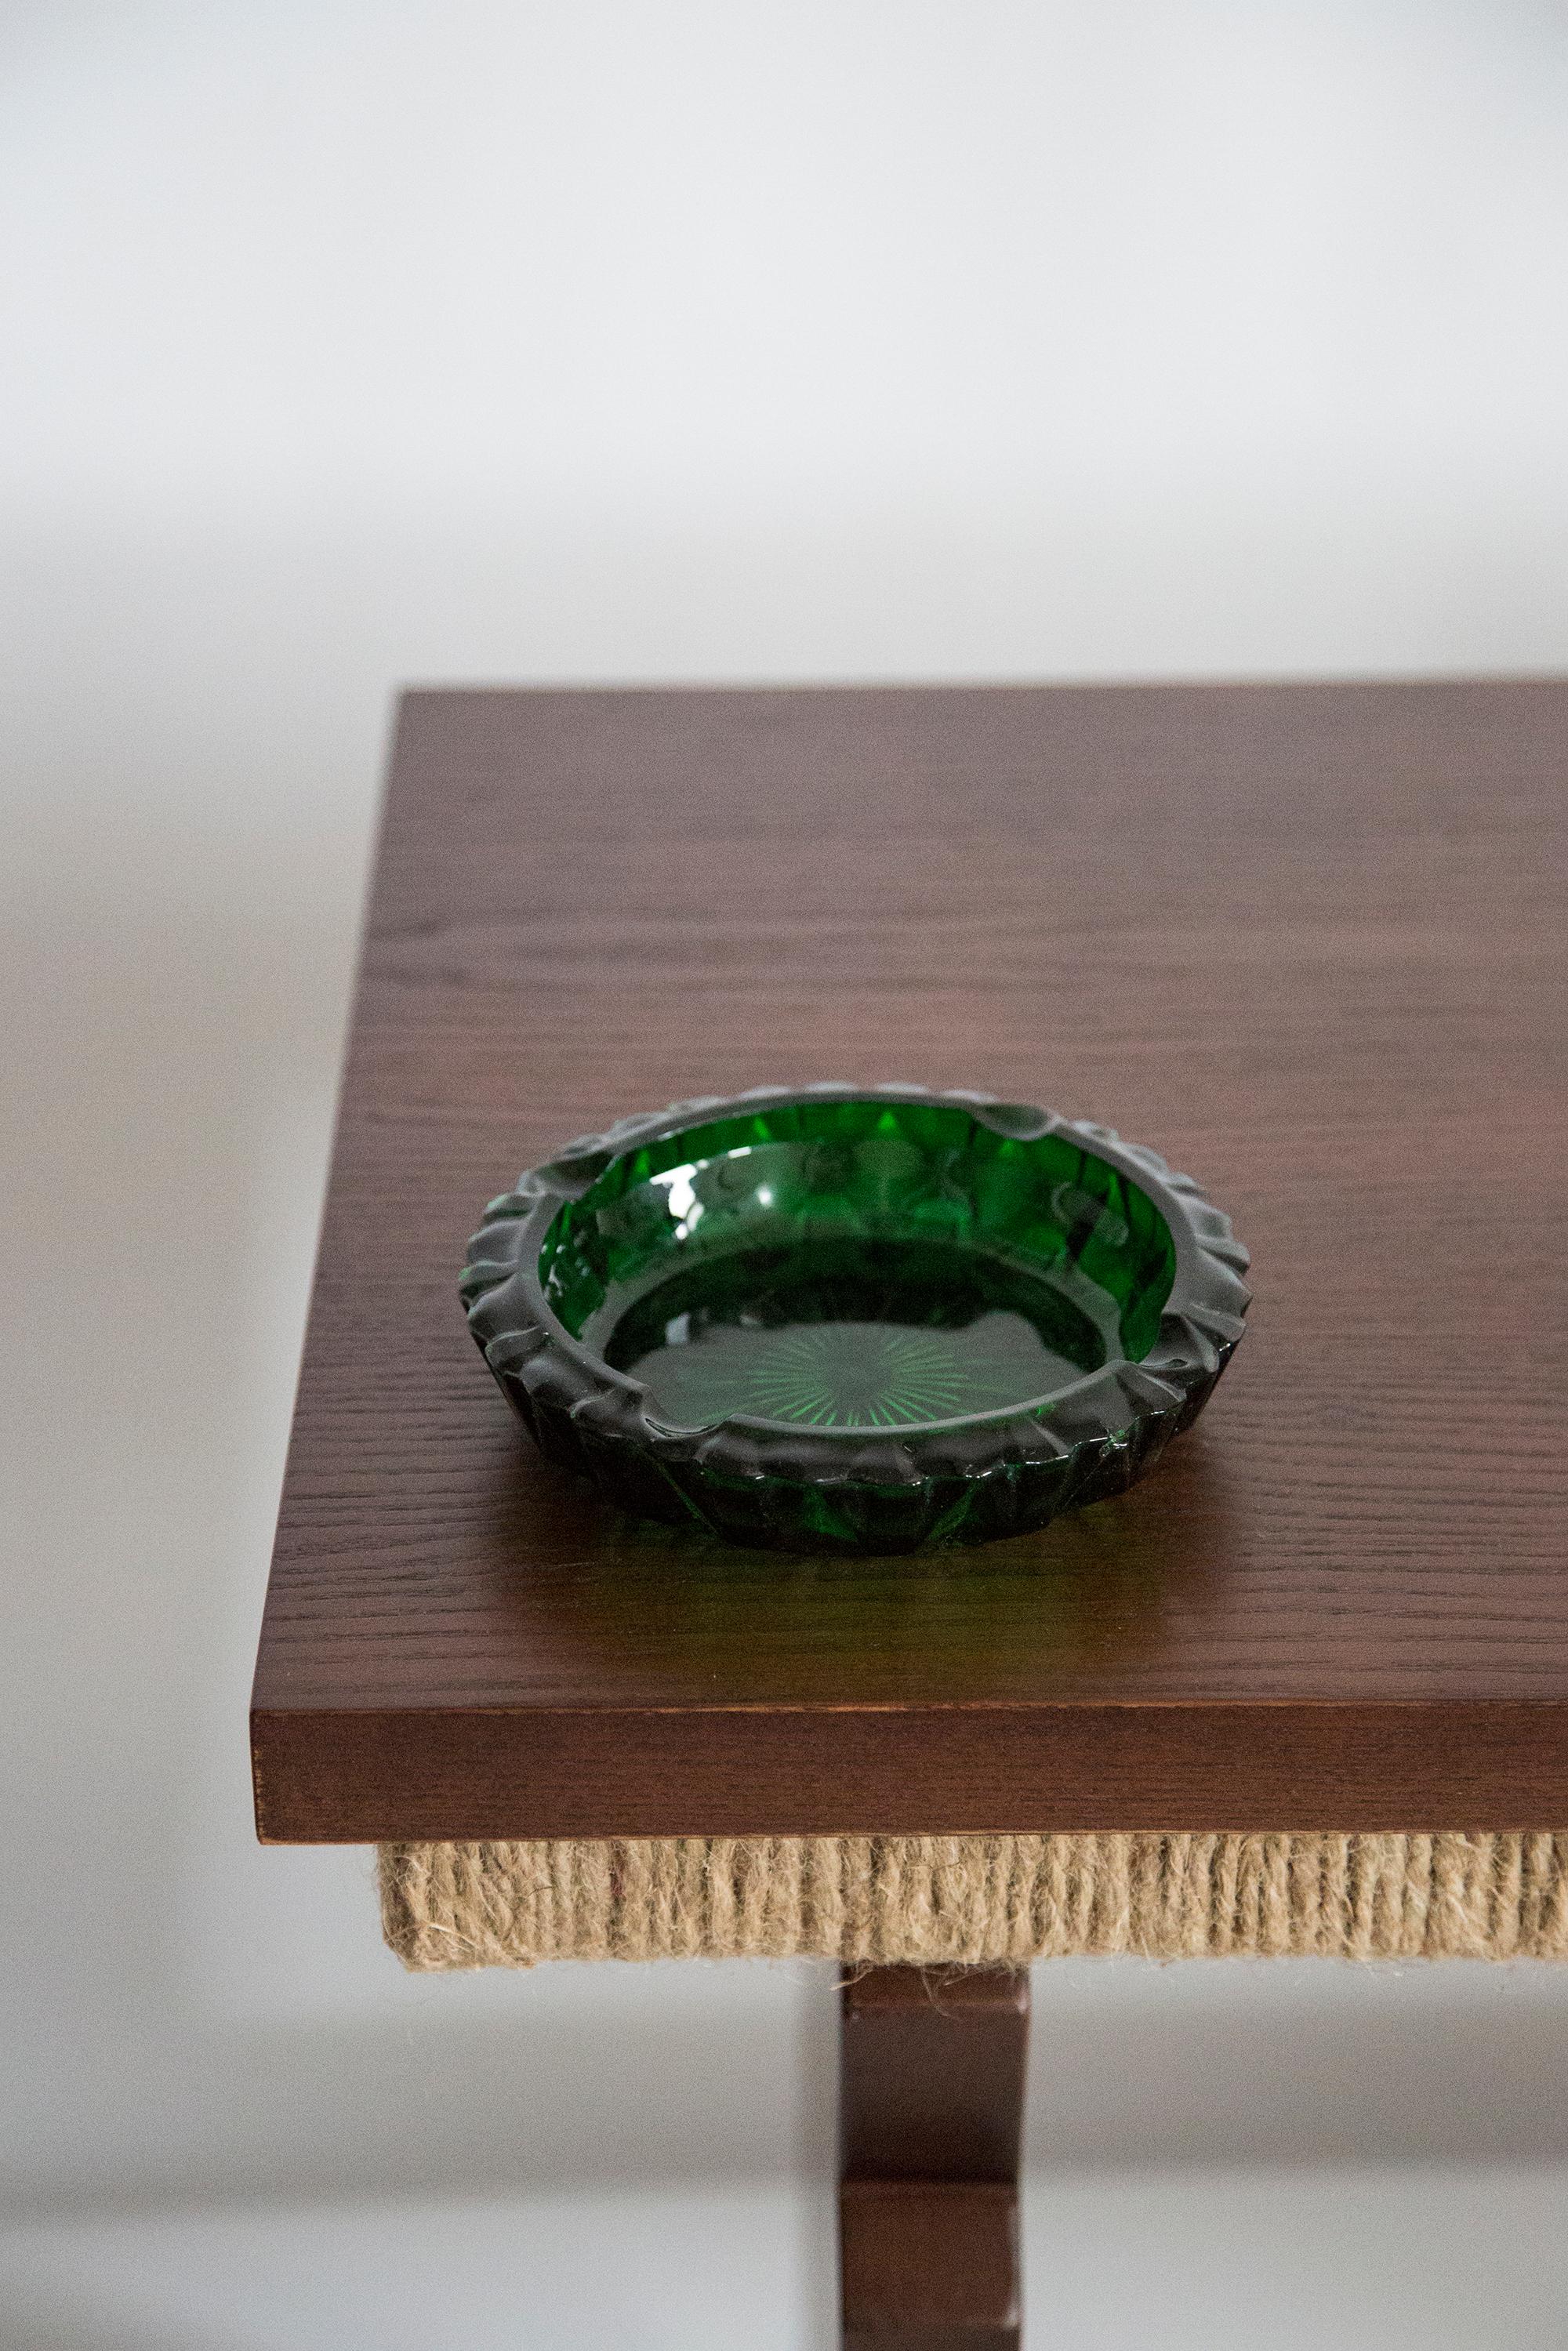 Mid Century Crystal Green Glass Ashtray Bowl, Italy, 1970s For Sale 4